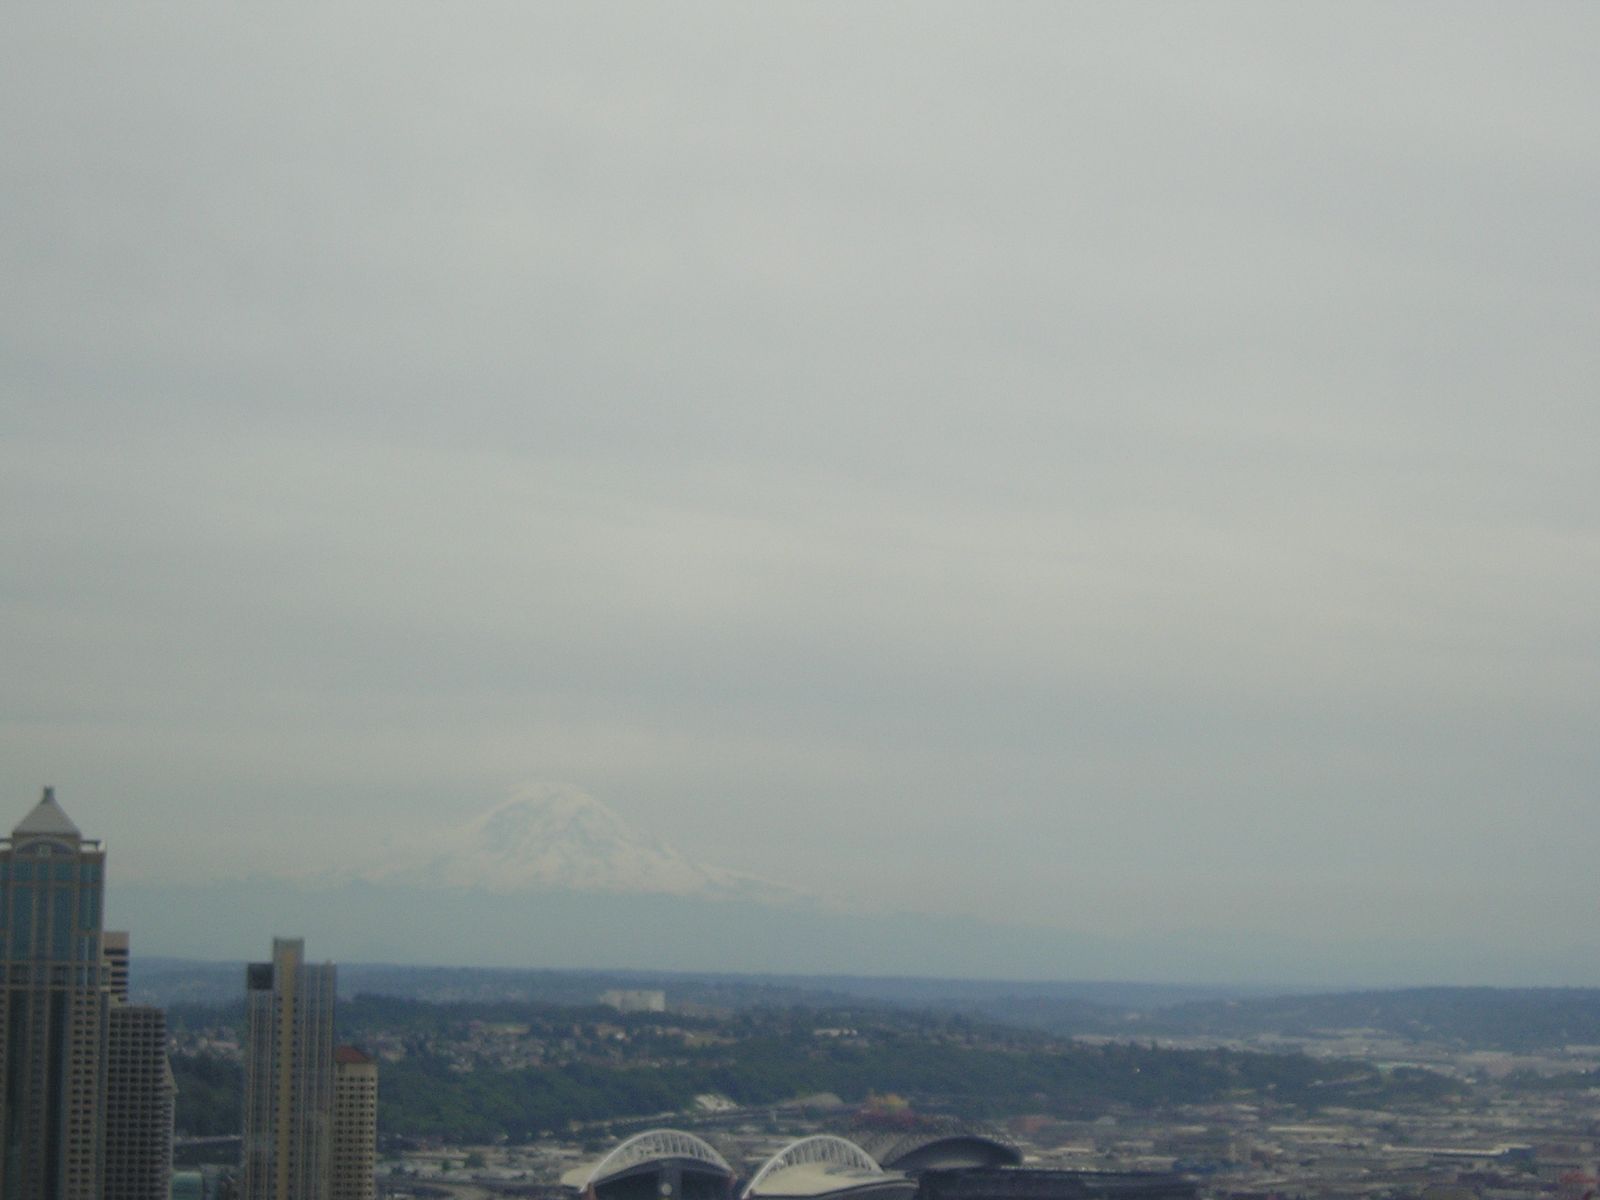 View of Mt. Rainier from the Space needle in Seattle